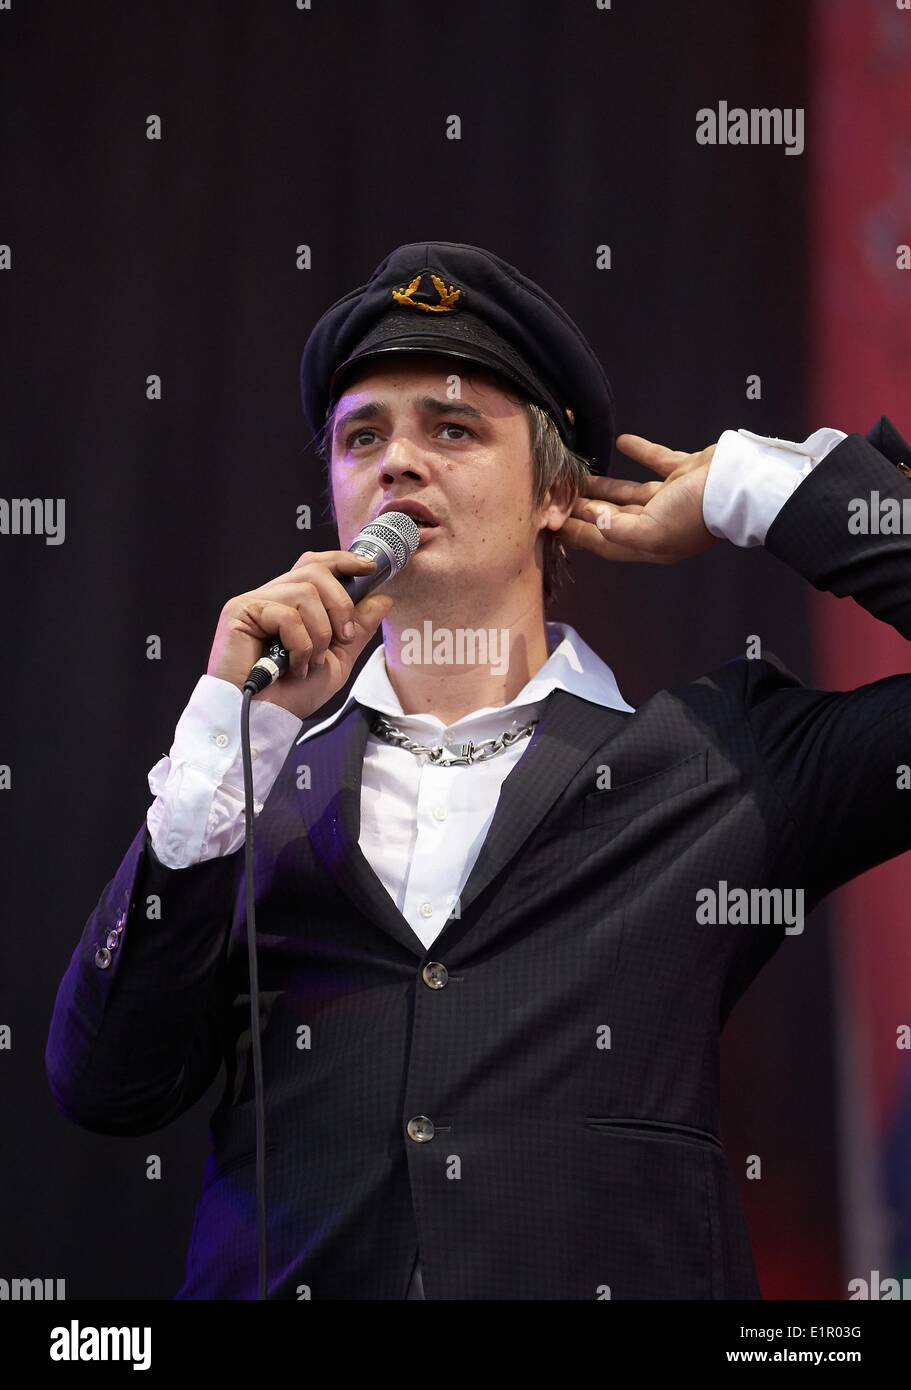 Nuerburg, Germany. 08th June, 2014. Singer Pete Doherty of the band  Babyshambles performs on stage during the 'Rock am Ring' music festival at  the Nuerburgring near Nuerburg, Germany, 08 June 2014. The